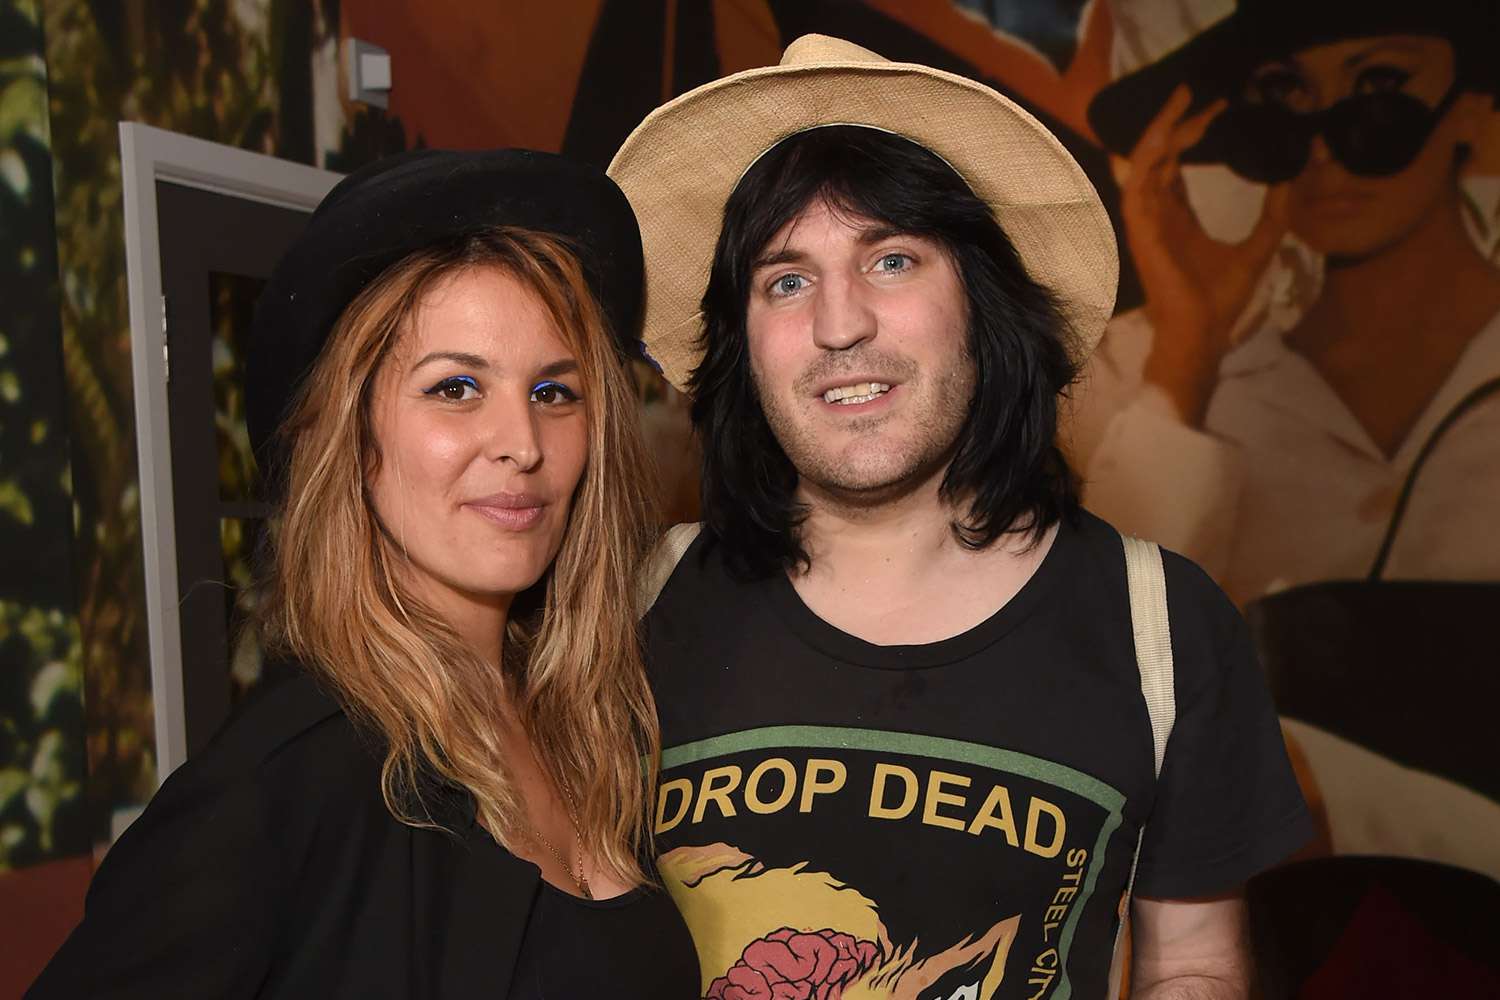 <p>Great British Baking Show host Noel Fielding and wife Lliana Bird have welcomed their second child together, Bird confirmed on Instagram on Oct. 29.</p>
                            <p>The radio DJ, 39, shared a photo of some Halloween decorations: four homemade spiders to represent each member of their recently-expanded family, as she explained to a fan in the comments.</p>
                            <p>"The Bird Fielding family of 🕷 x x (finally figured out what to do with all my old mic covers!) #halloweencrafts," Bird captioned the post, telling the fan, "noel is pink, dali is orange, i'm grey and iggy is red 💜💜"</p>
                            <p>Baby Iggy joins big sister Dali, whom the couple welcomed in 2018.</p>
                            